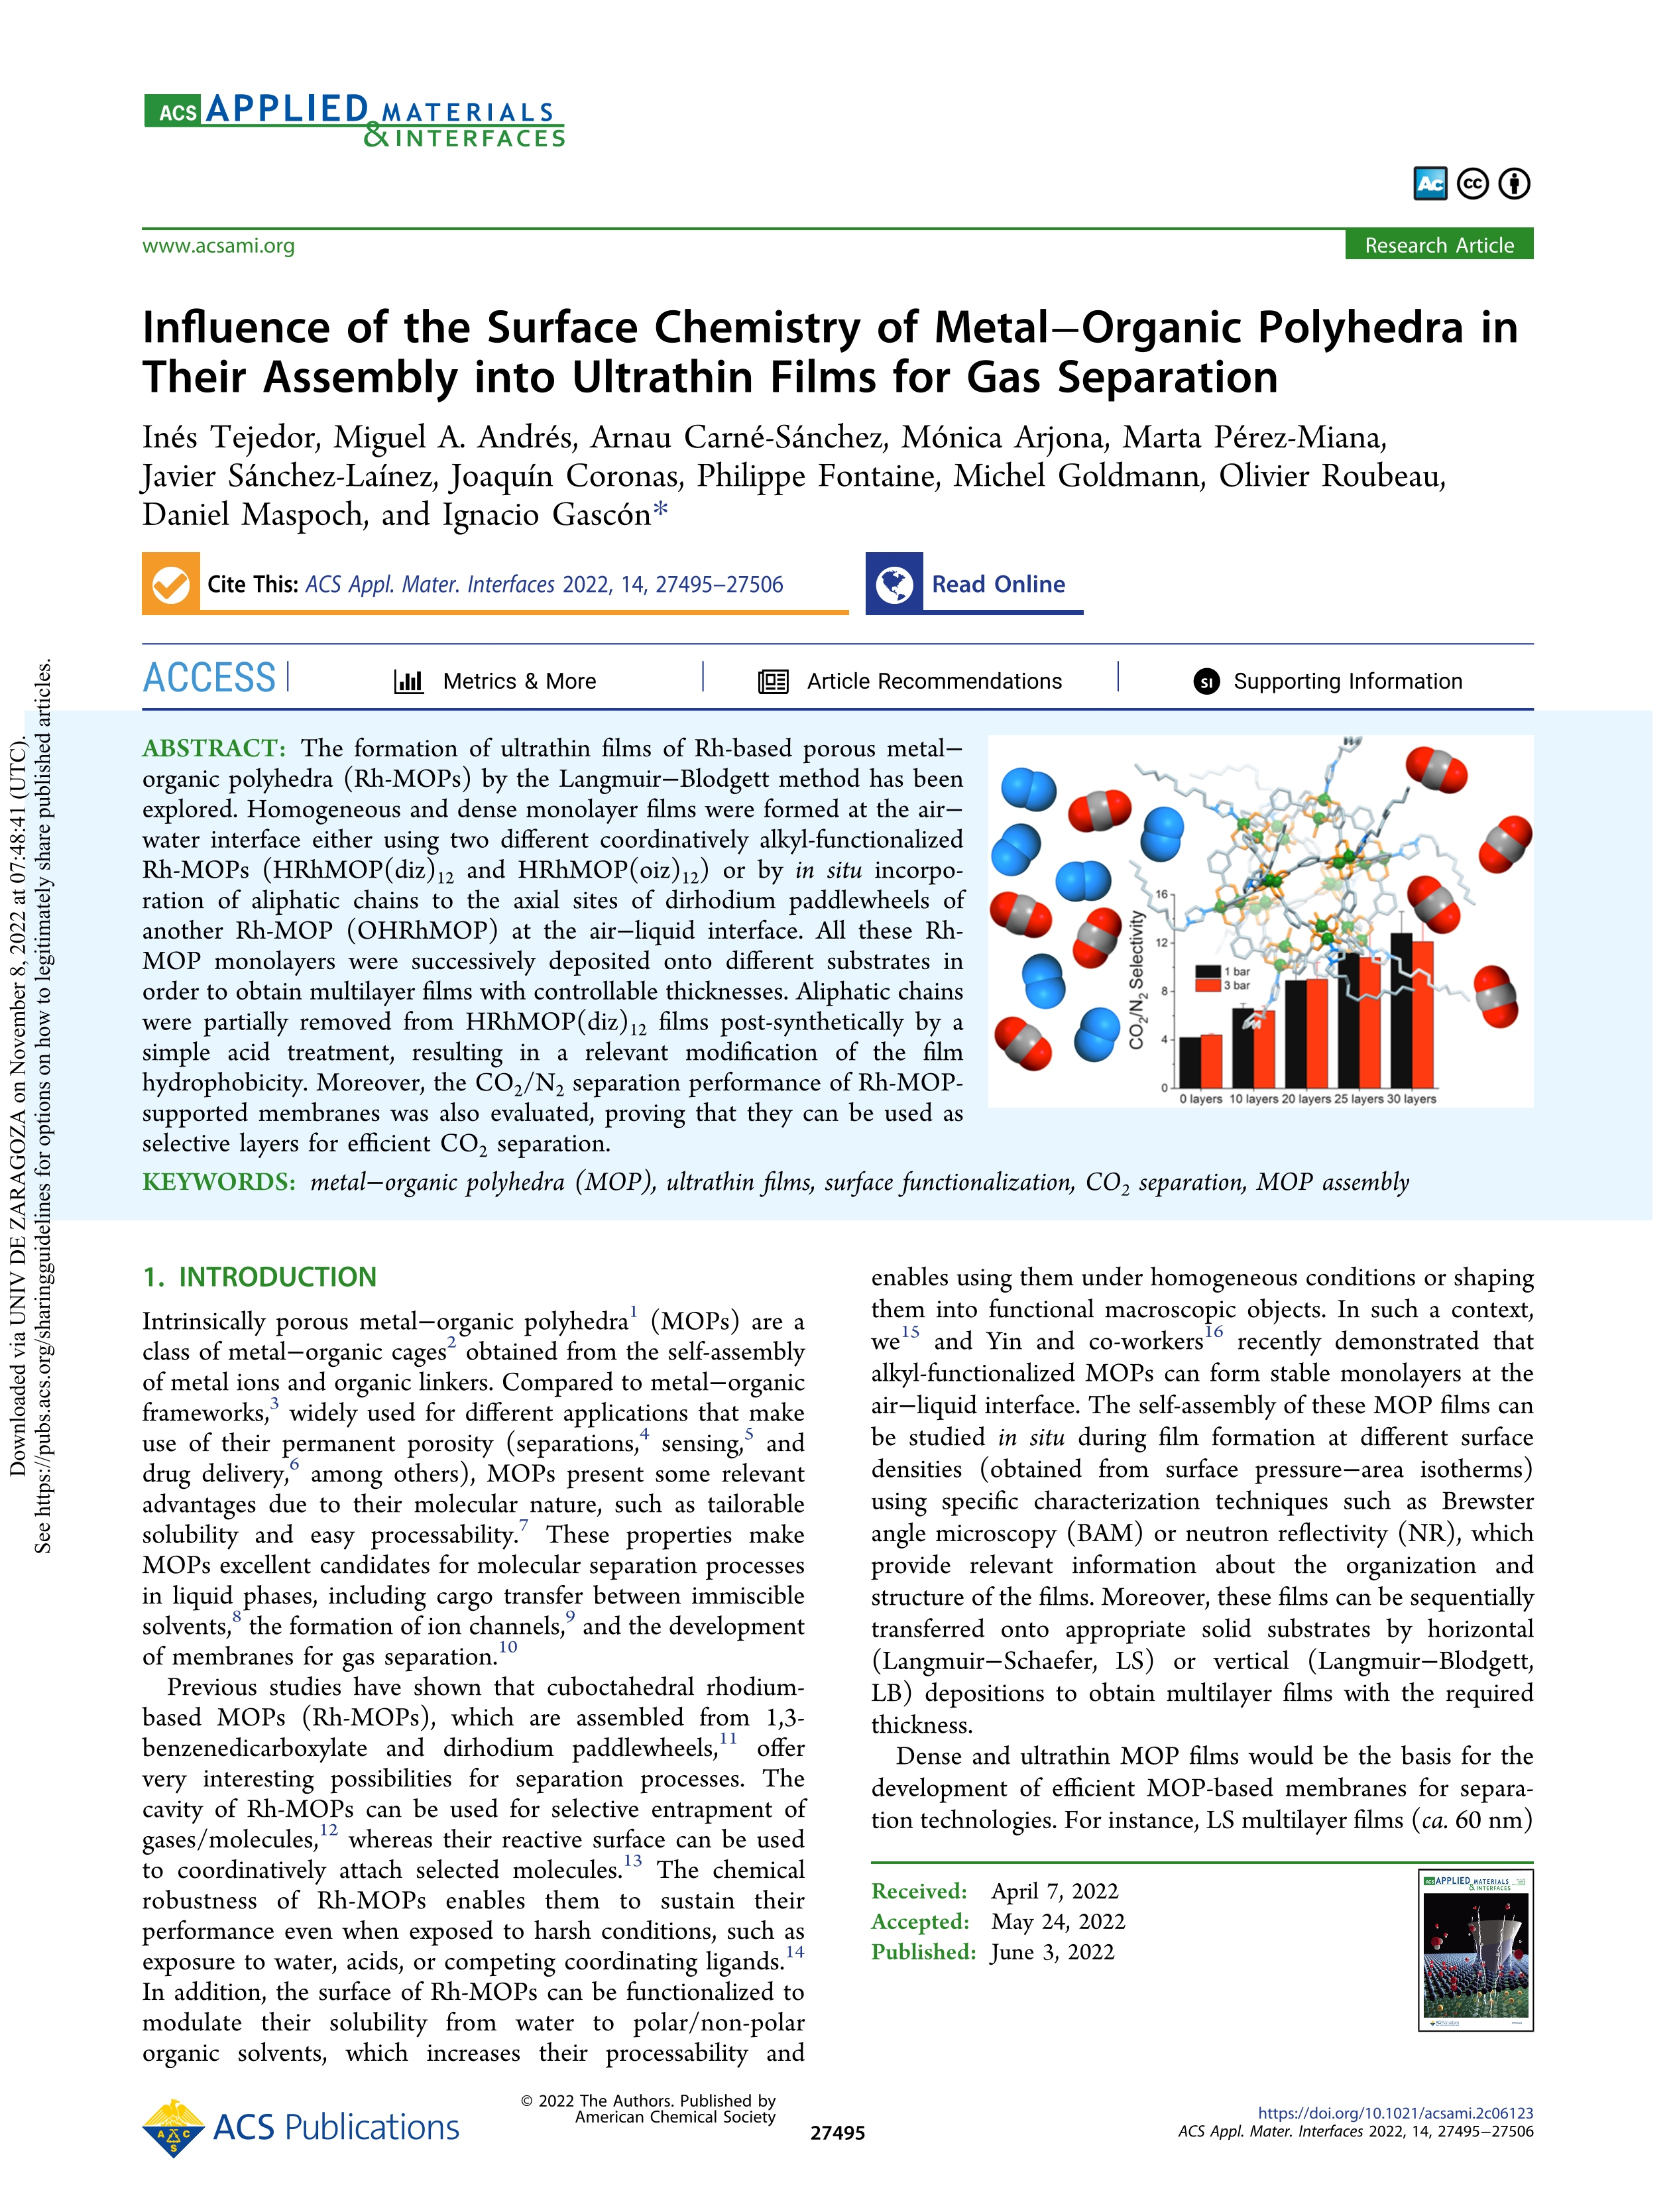 Influence of the Surface Chemistry of Metal-Organic Polyhedra in Their Assembly into Ultrathin Films for Gas Separation